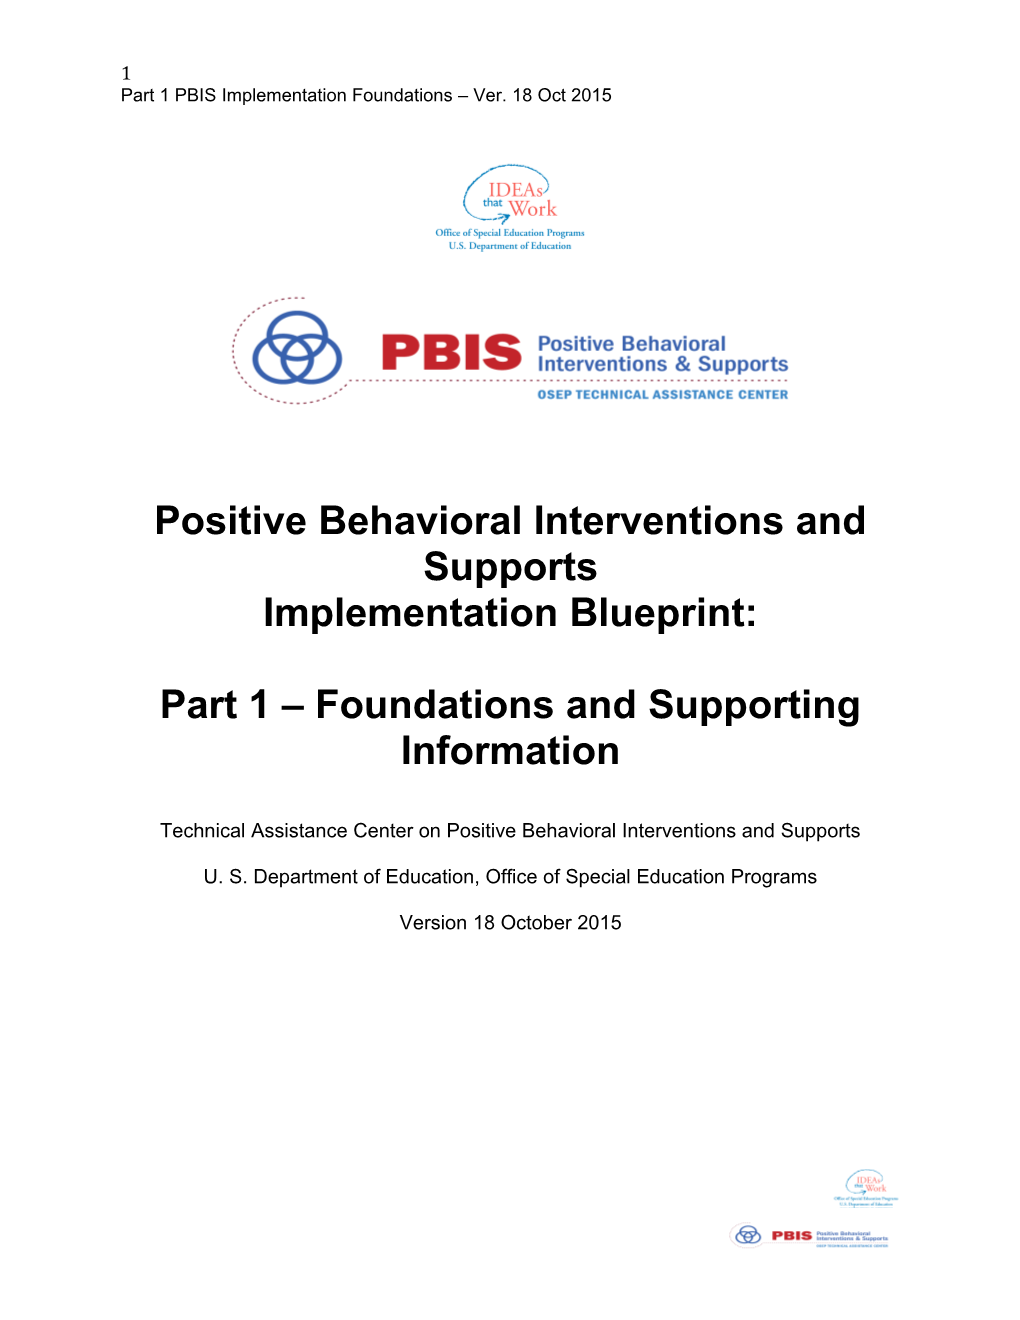 Positive Behavioral Interventions and Supports s2